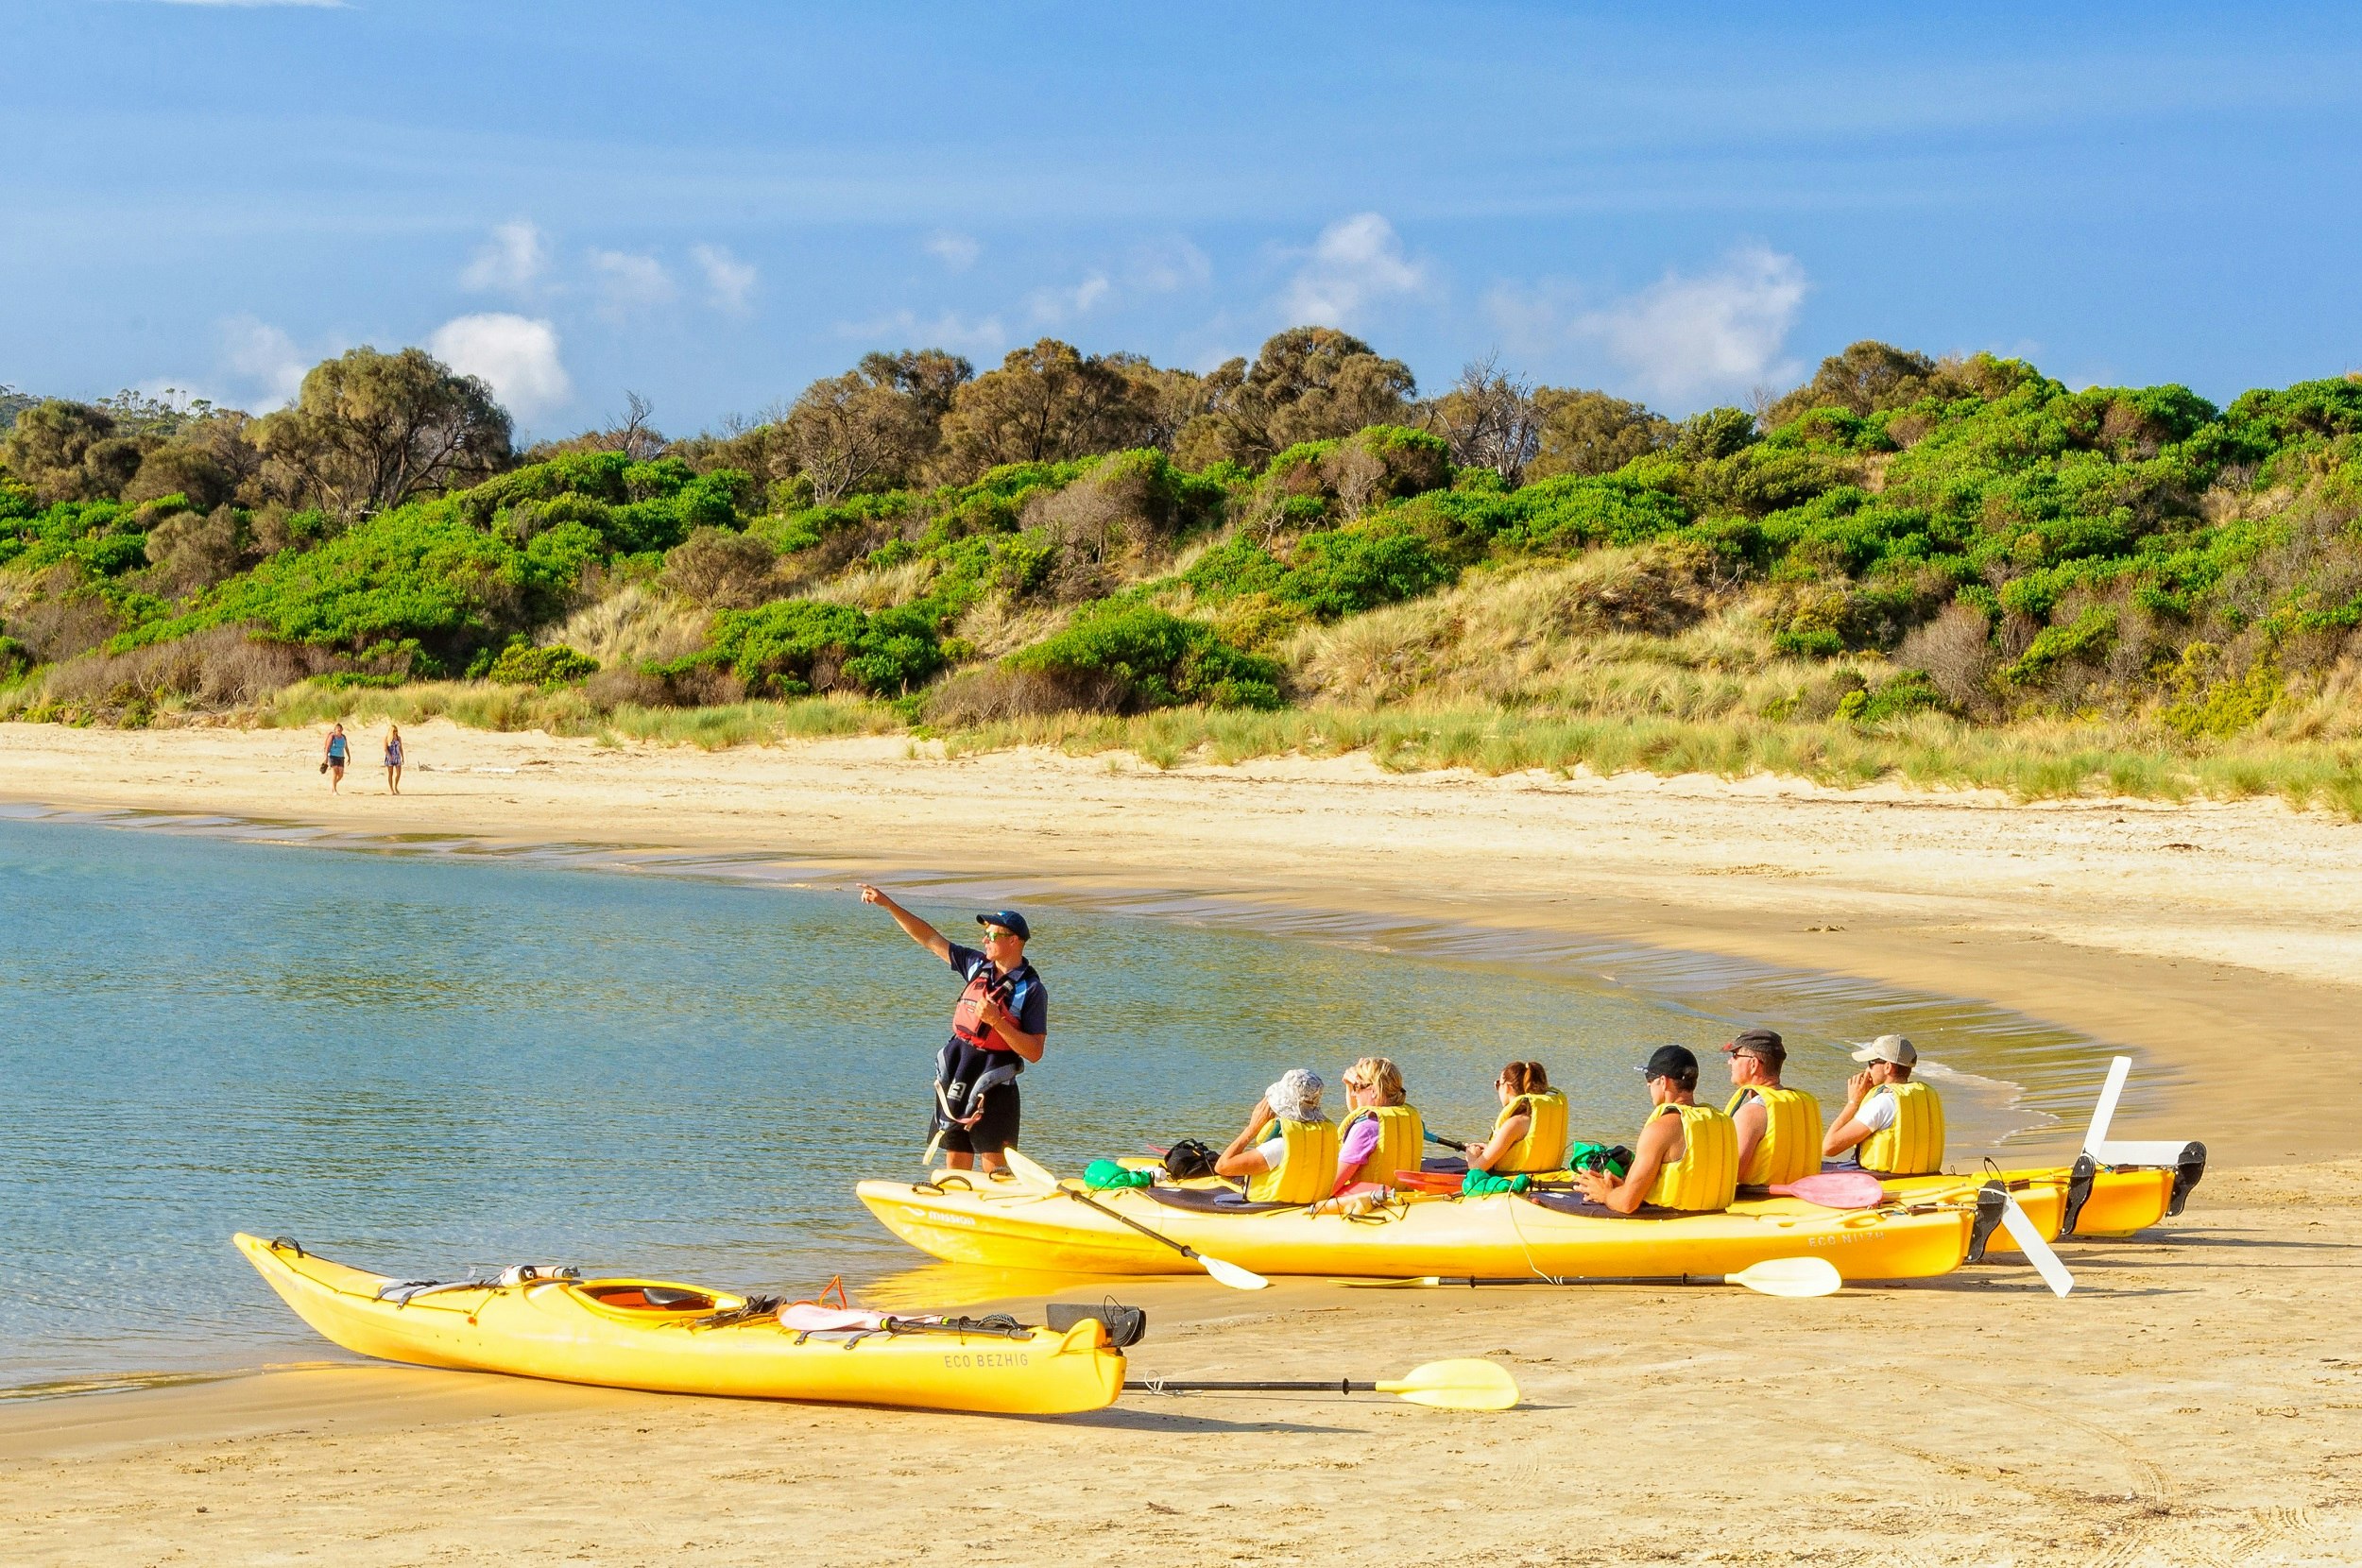 Six people sit in three two-man kayaks on a sweeping section of beach; the instructor stands in the shallows (his empty kayak on the beach) and points out something in the distance.